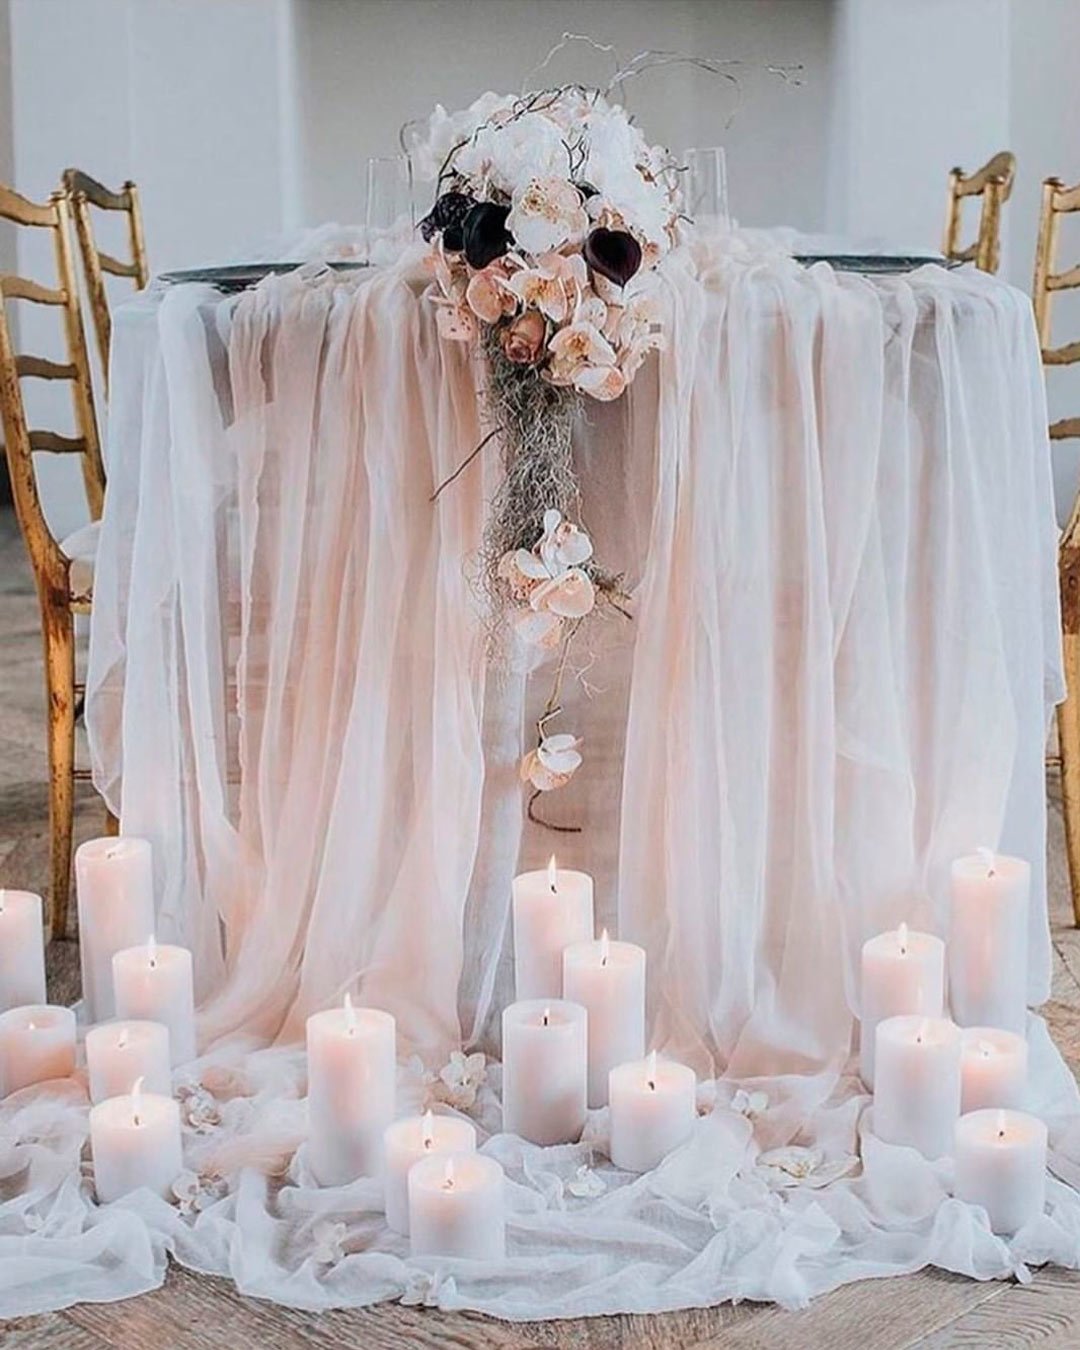 wedding at home table candles decor